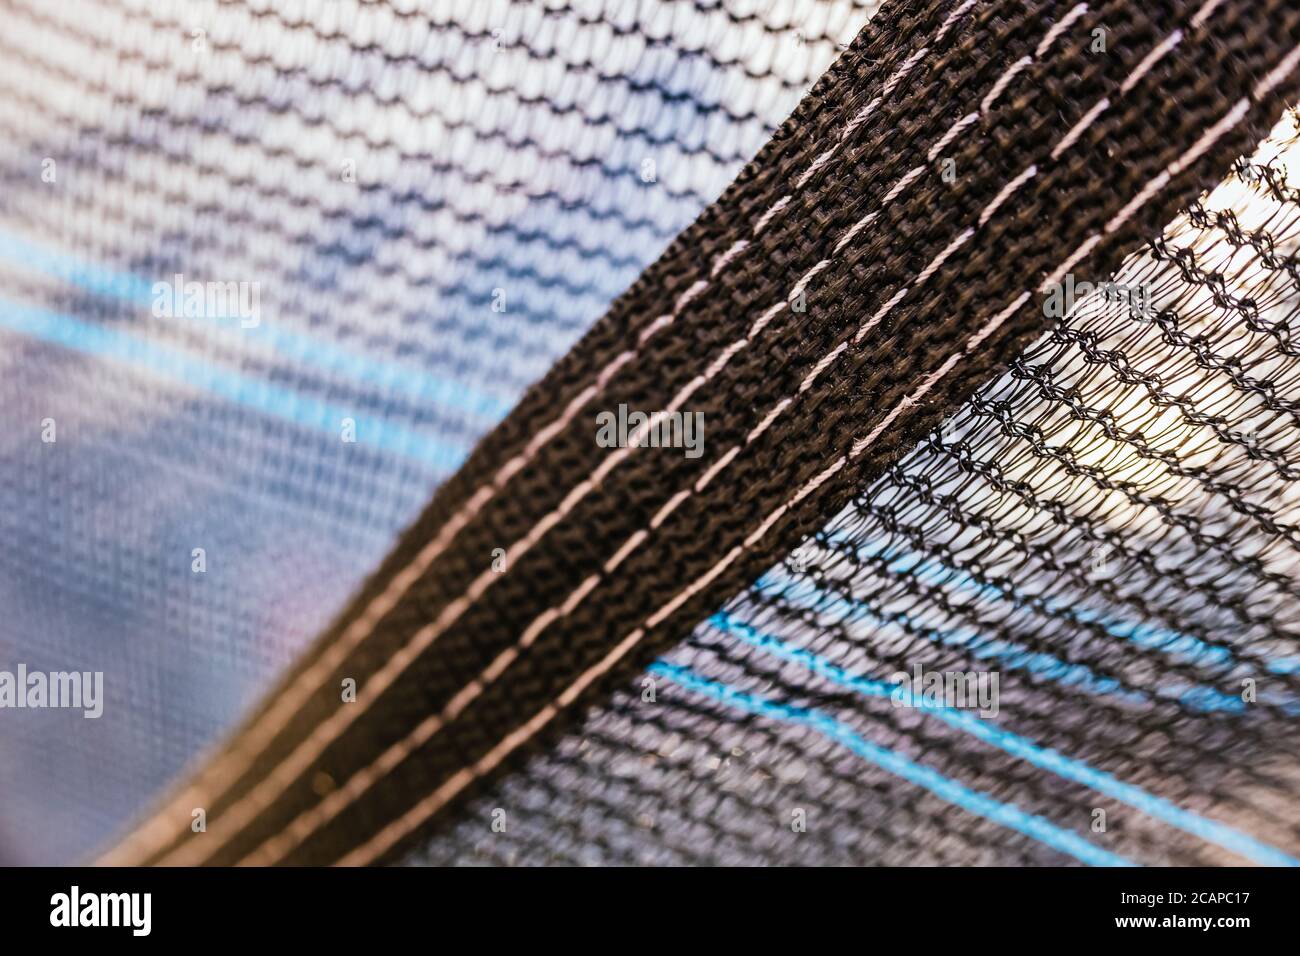 Close-up detail of the knots of a fine-mesh nylon mesh Stock Photo